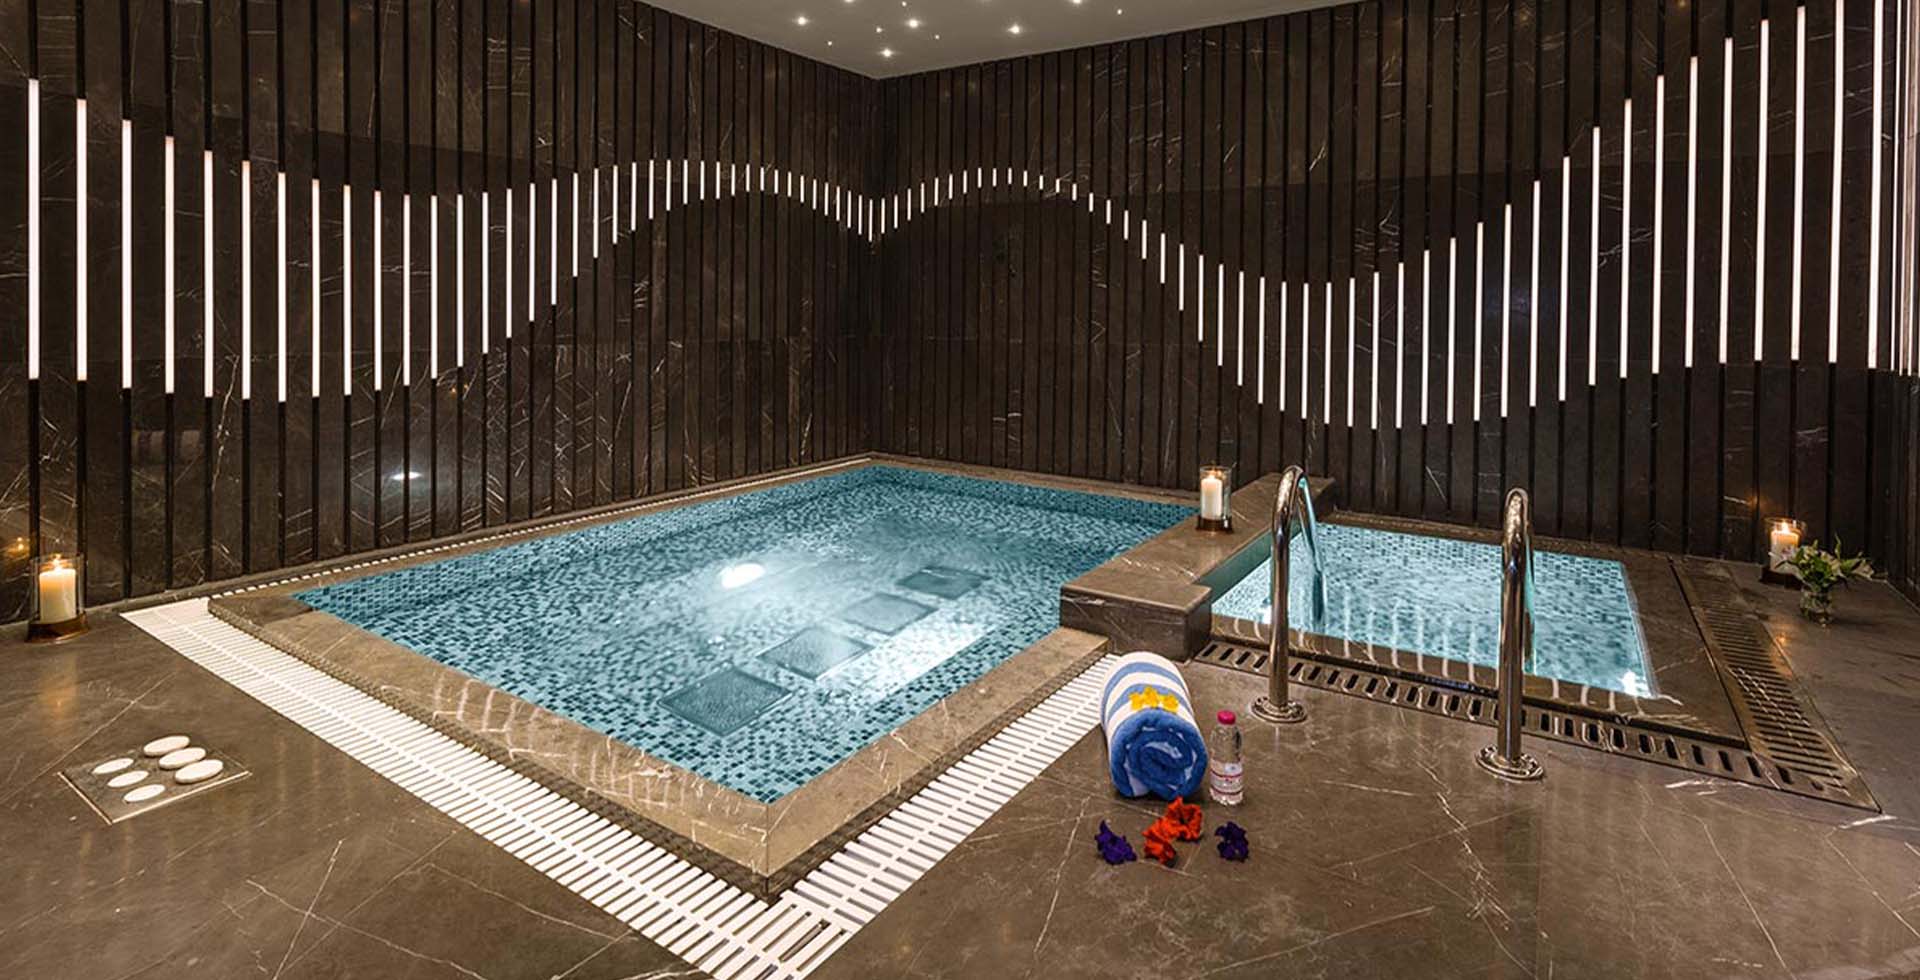 Doha Hydromassage pool - Elevate luxury living. Acquire and install this Sauna Dekor masterpiece, blending visionary design with a cost-effective solution for an unmatched wellness retreat."